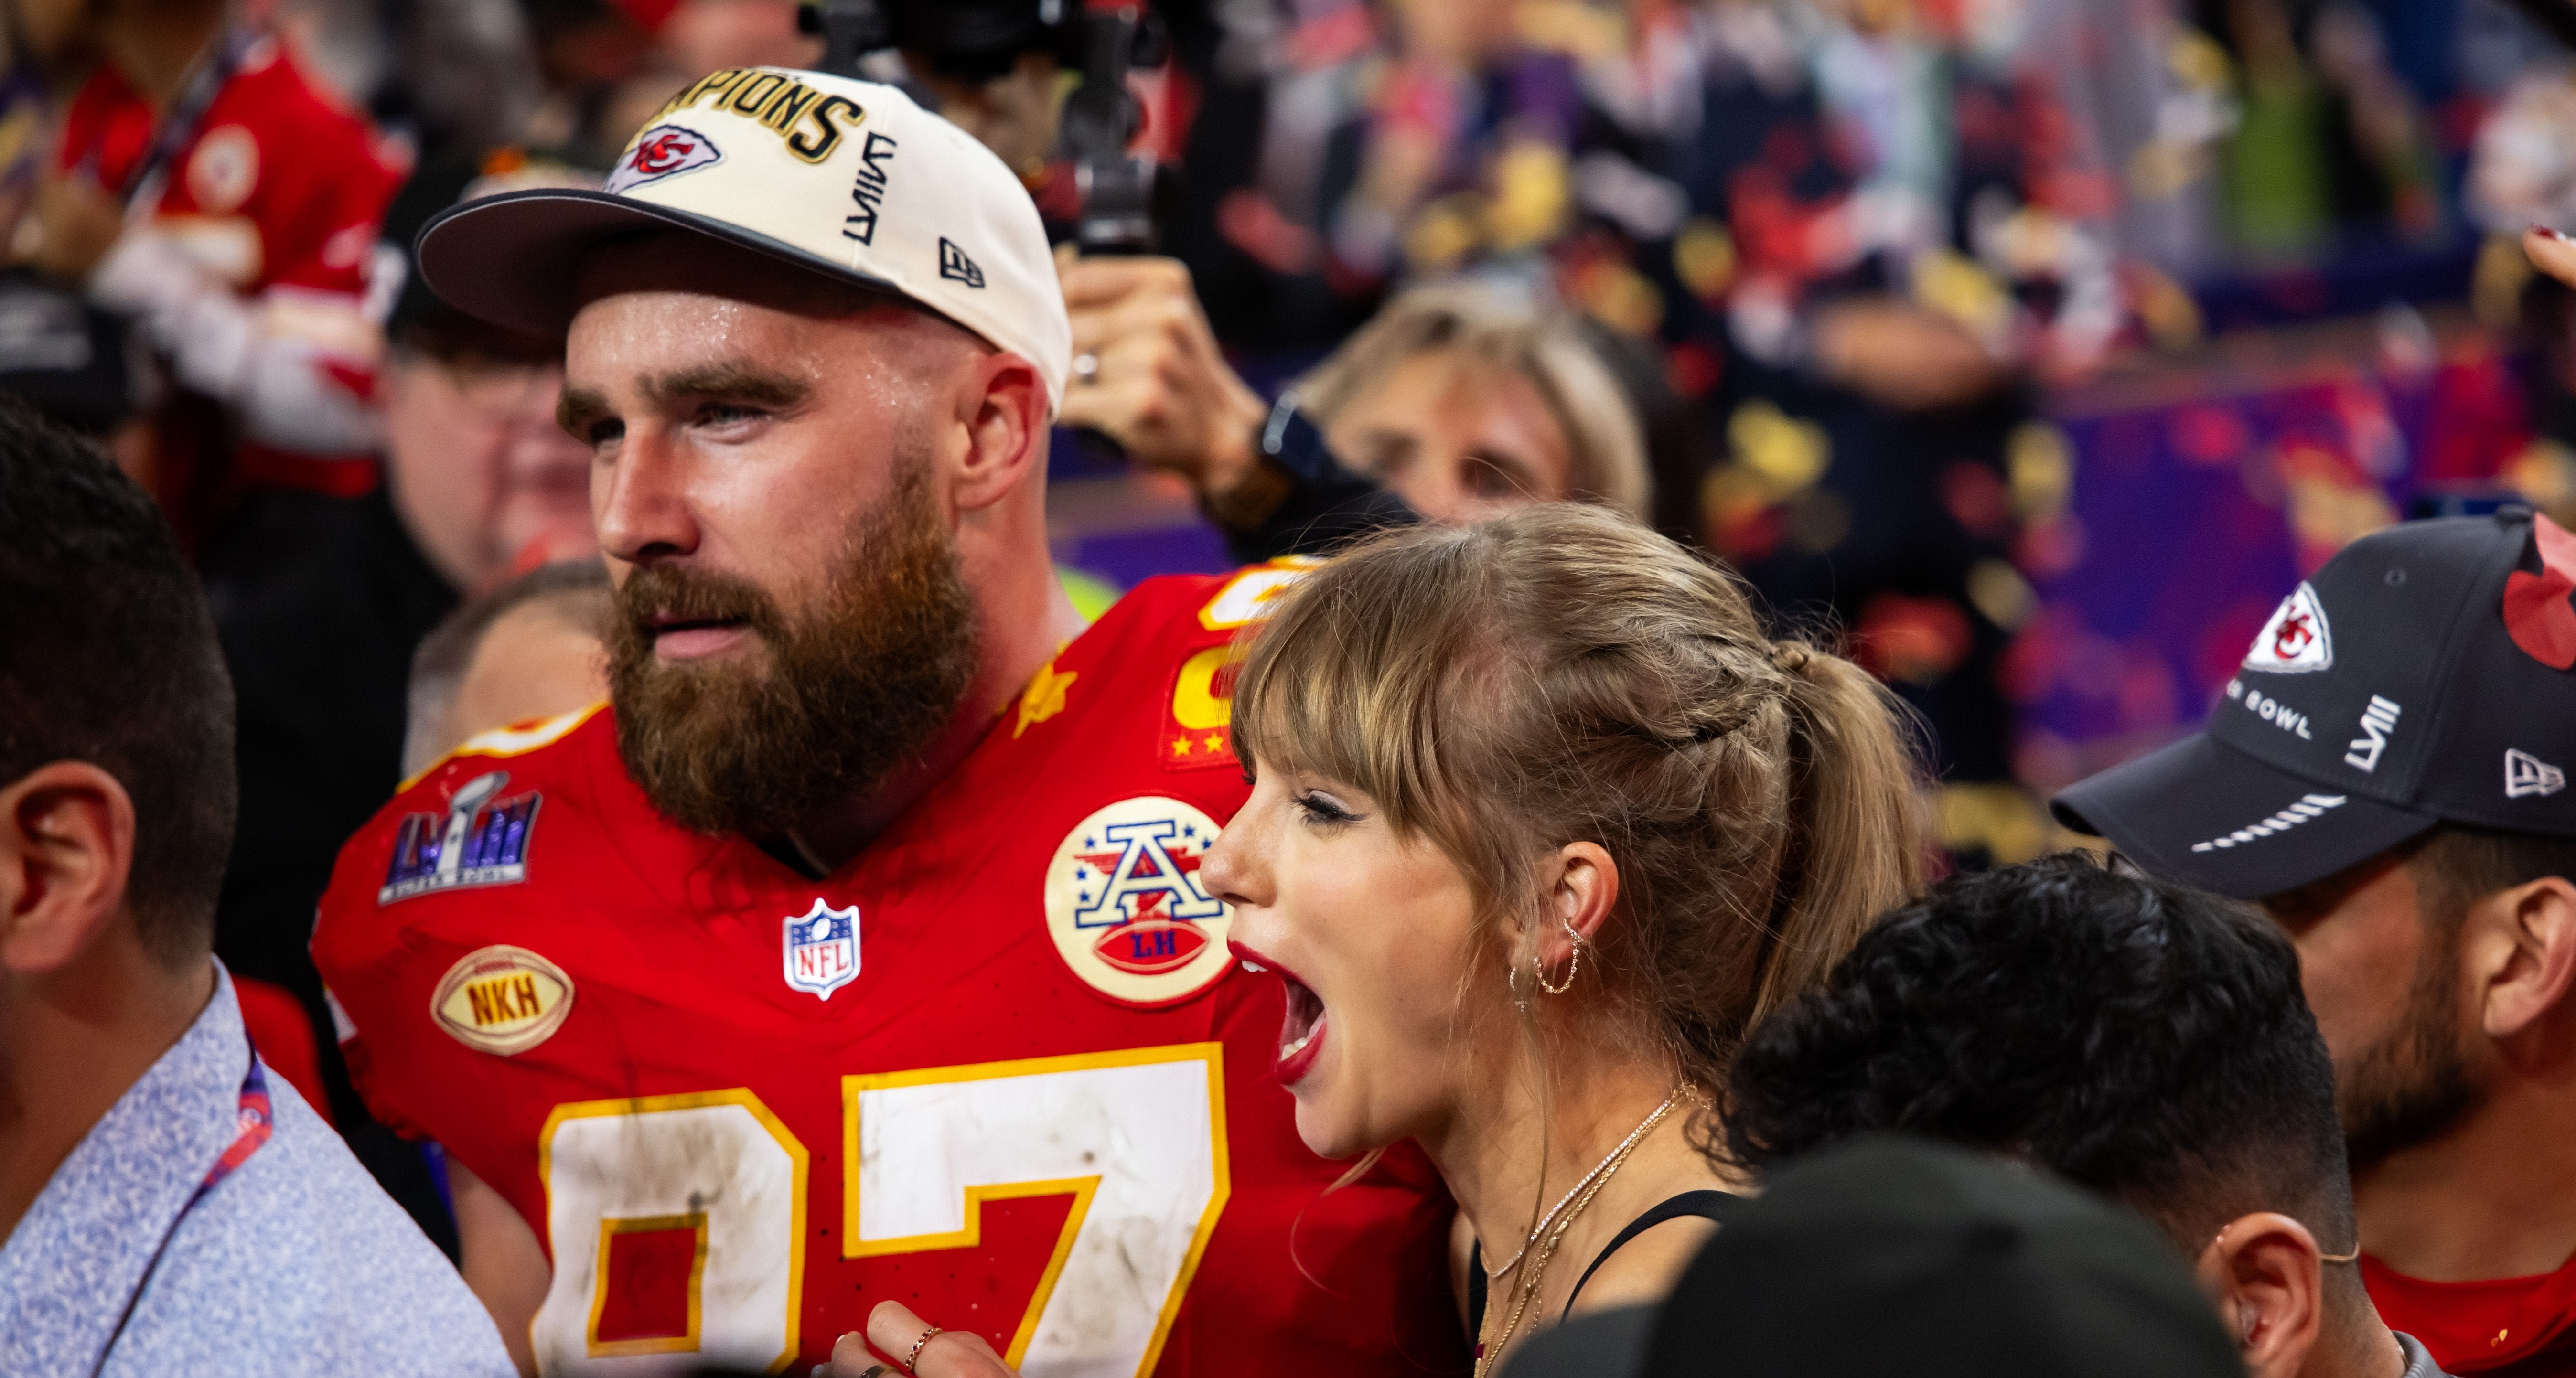 As Chiefs head to the White House, will Travis Kelce's lucky charm Taylor Swift be there?